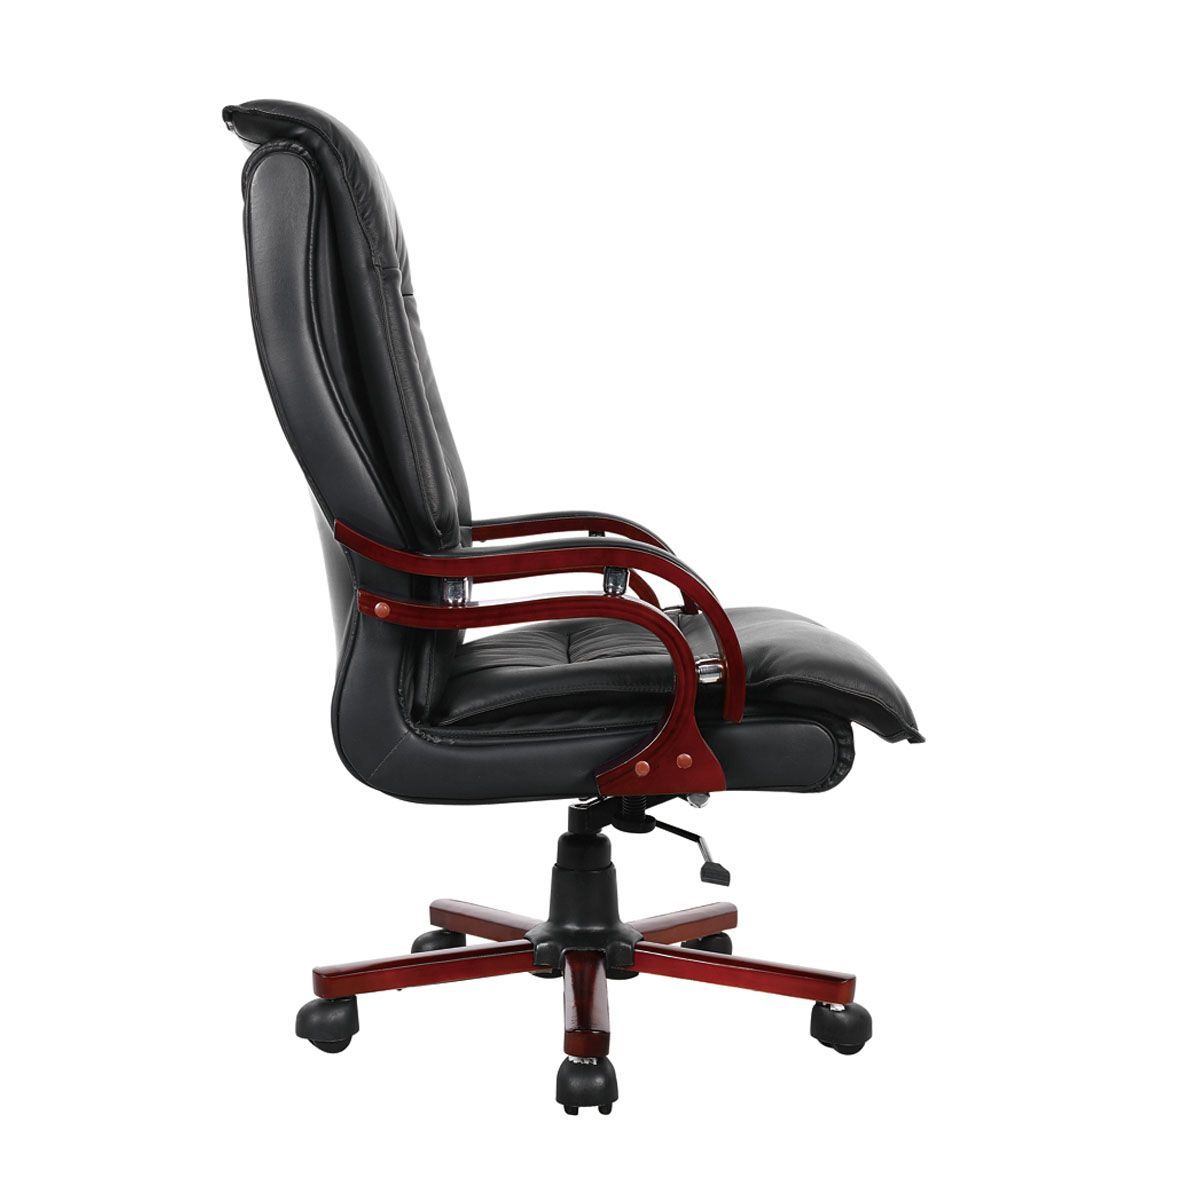 Professional High-Back Executive Genuine Leather Office Chair | Crazy Sales